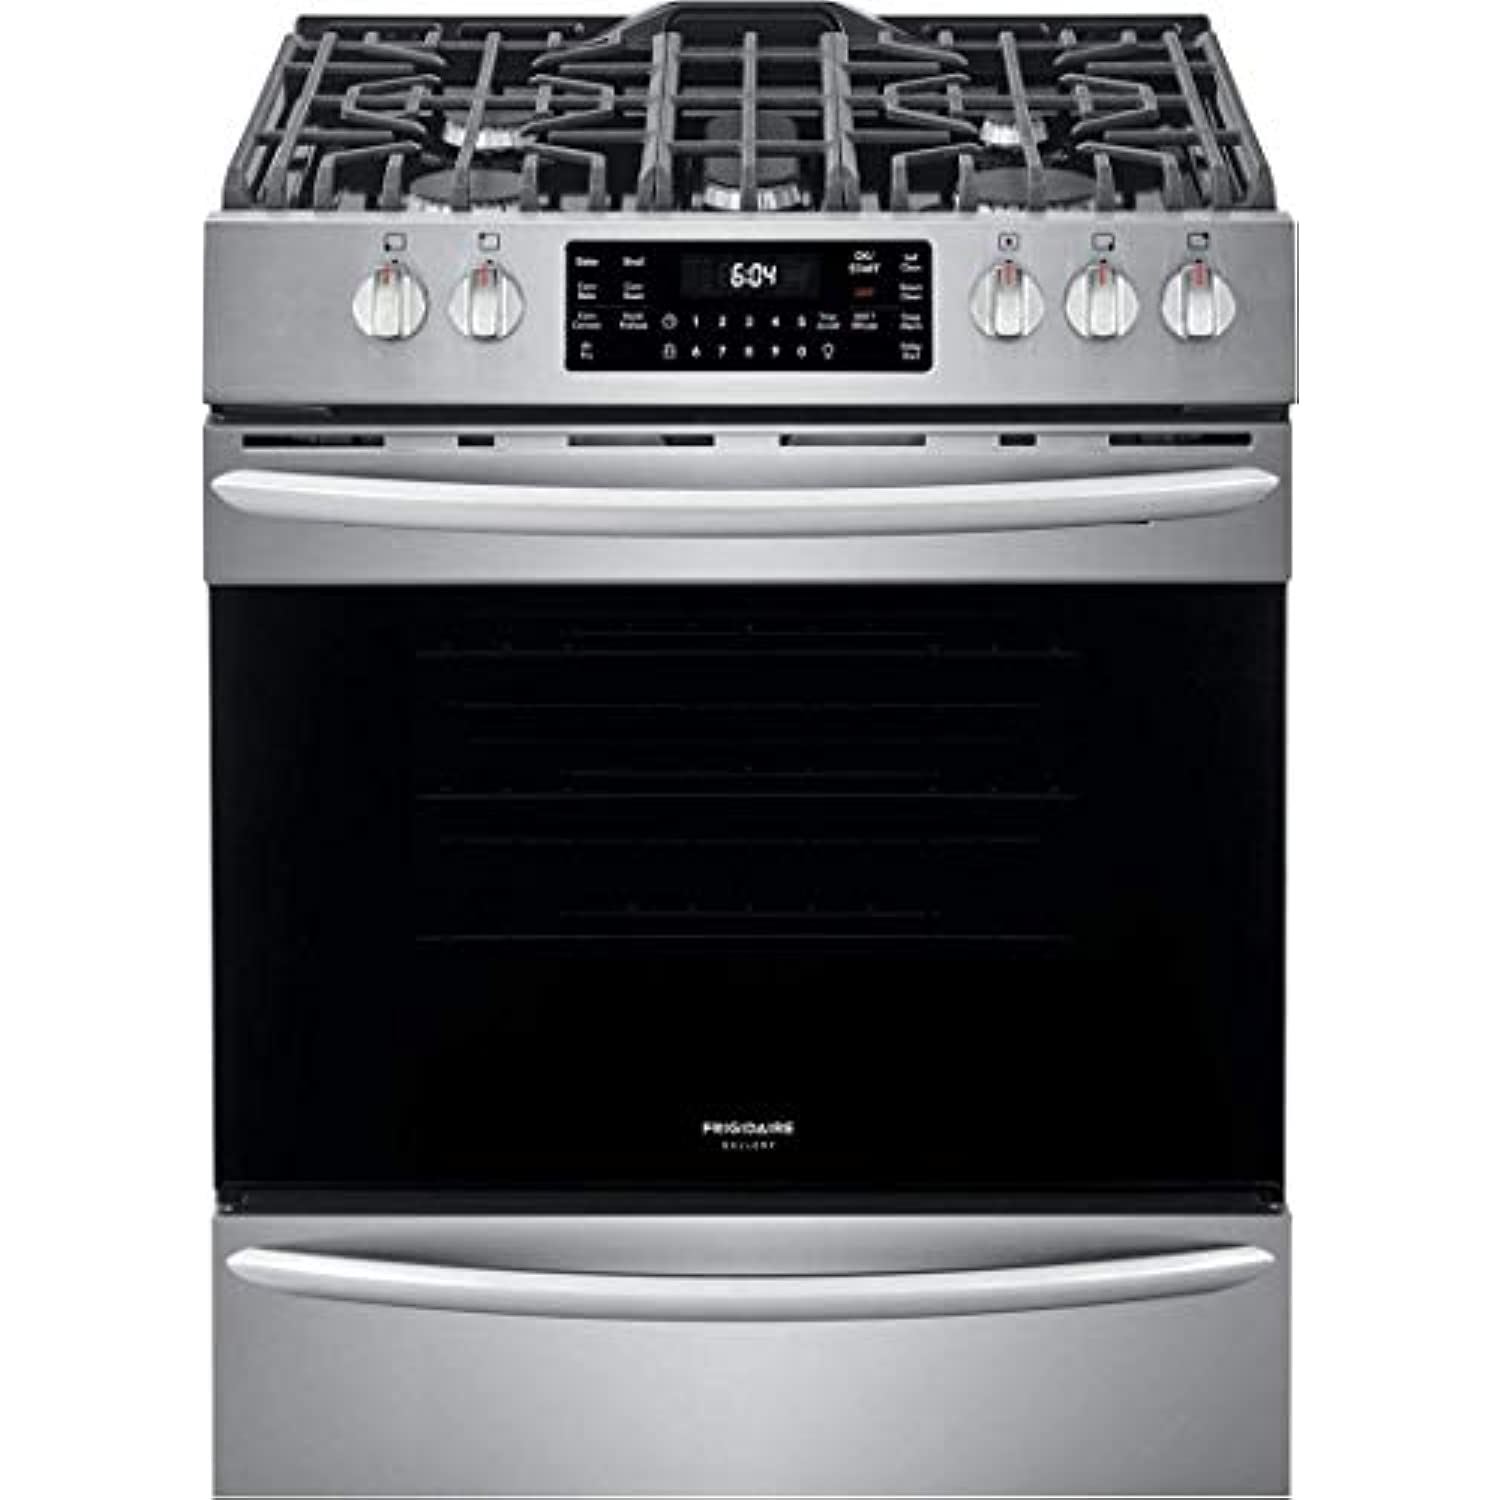 Frigidaire FGGH3047VF 30" Gallery Series Gas Range with 5 Sealed Burners, griddle, True Convection Oven, Self Cleaning, Air Fry Function, in Stainless Steel - image 1 of 10